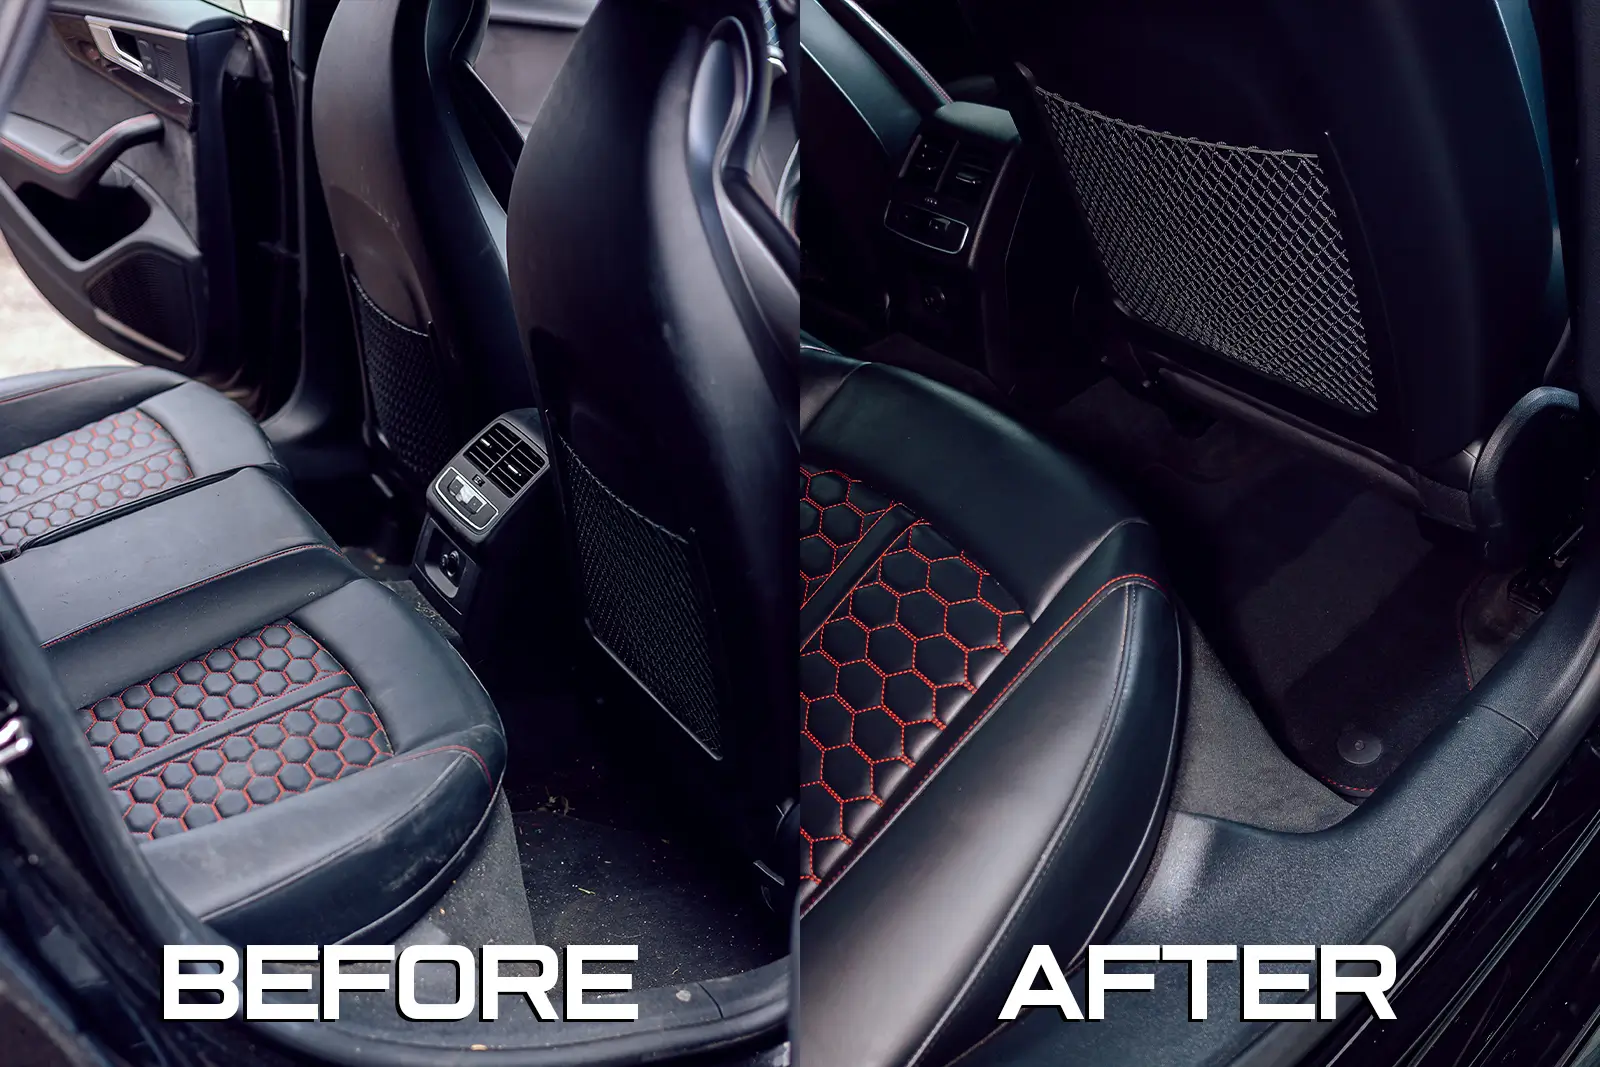 interior of car carpet before and after detailing - Calgary auto detailers